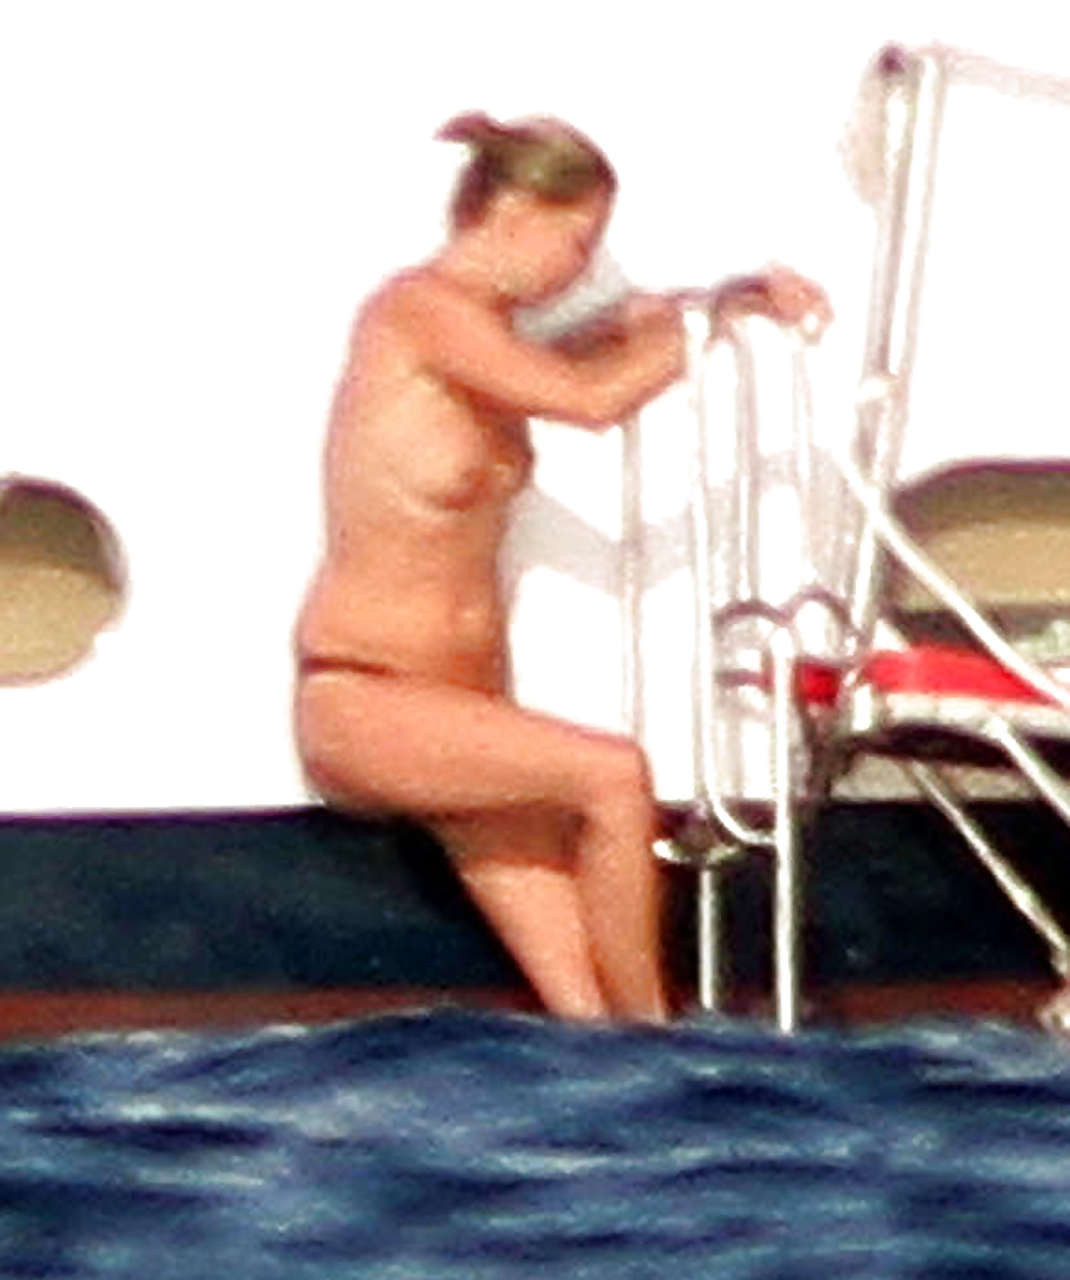 Kate Moss topless jumping from yach and showing her panties paparazzi shoots #75290683